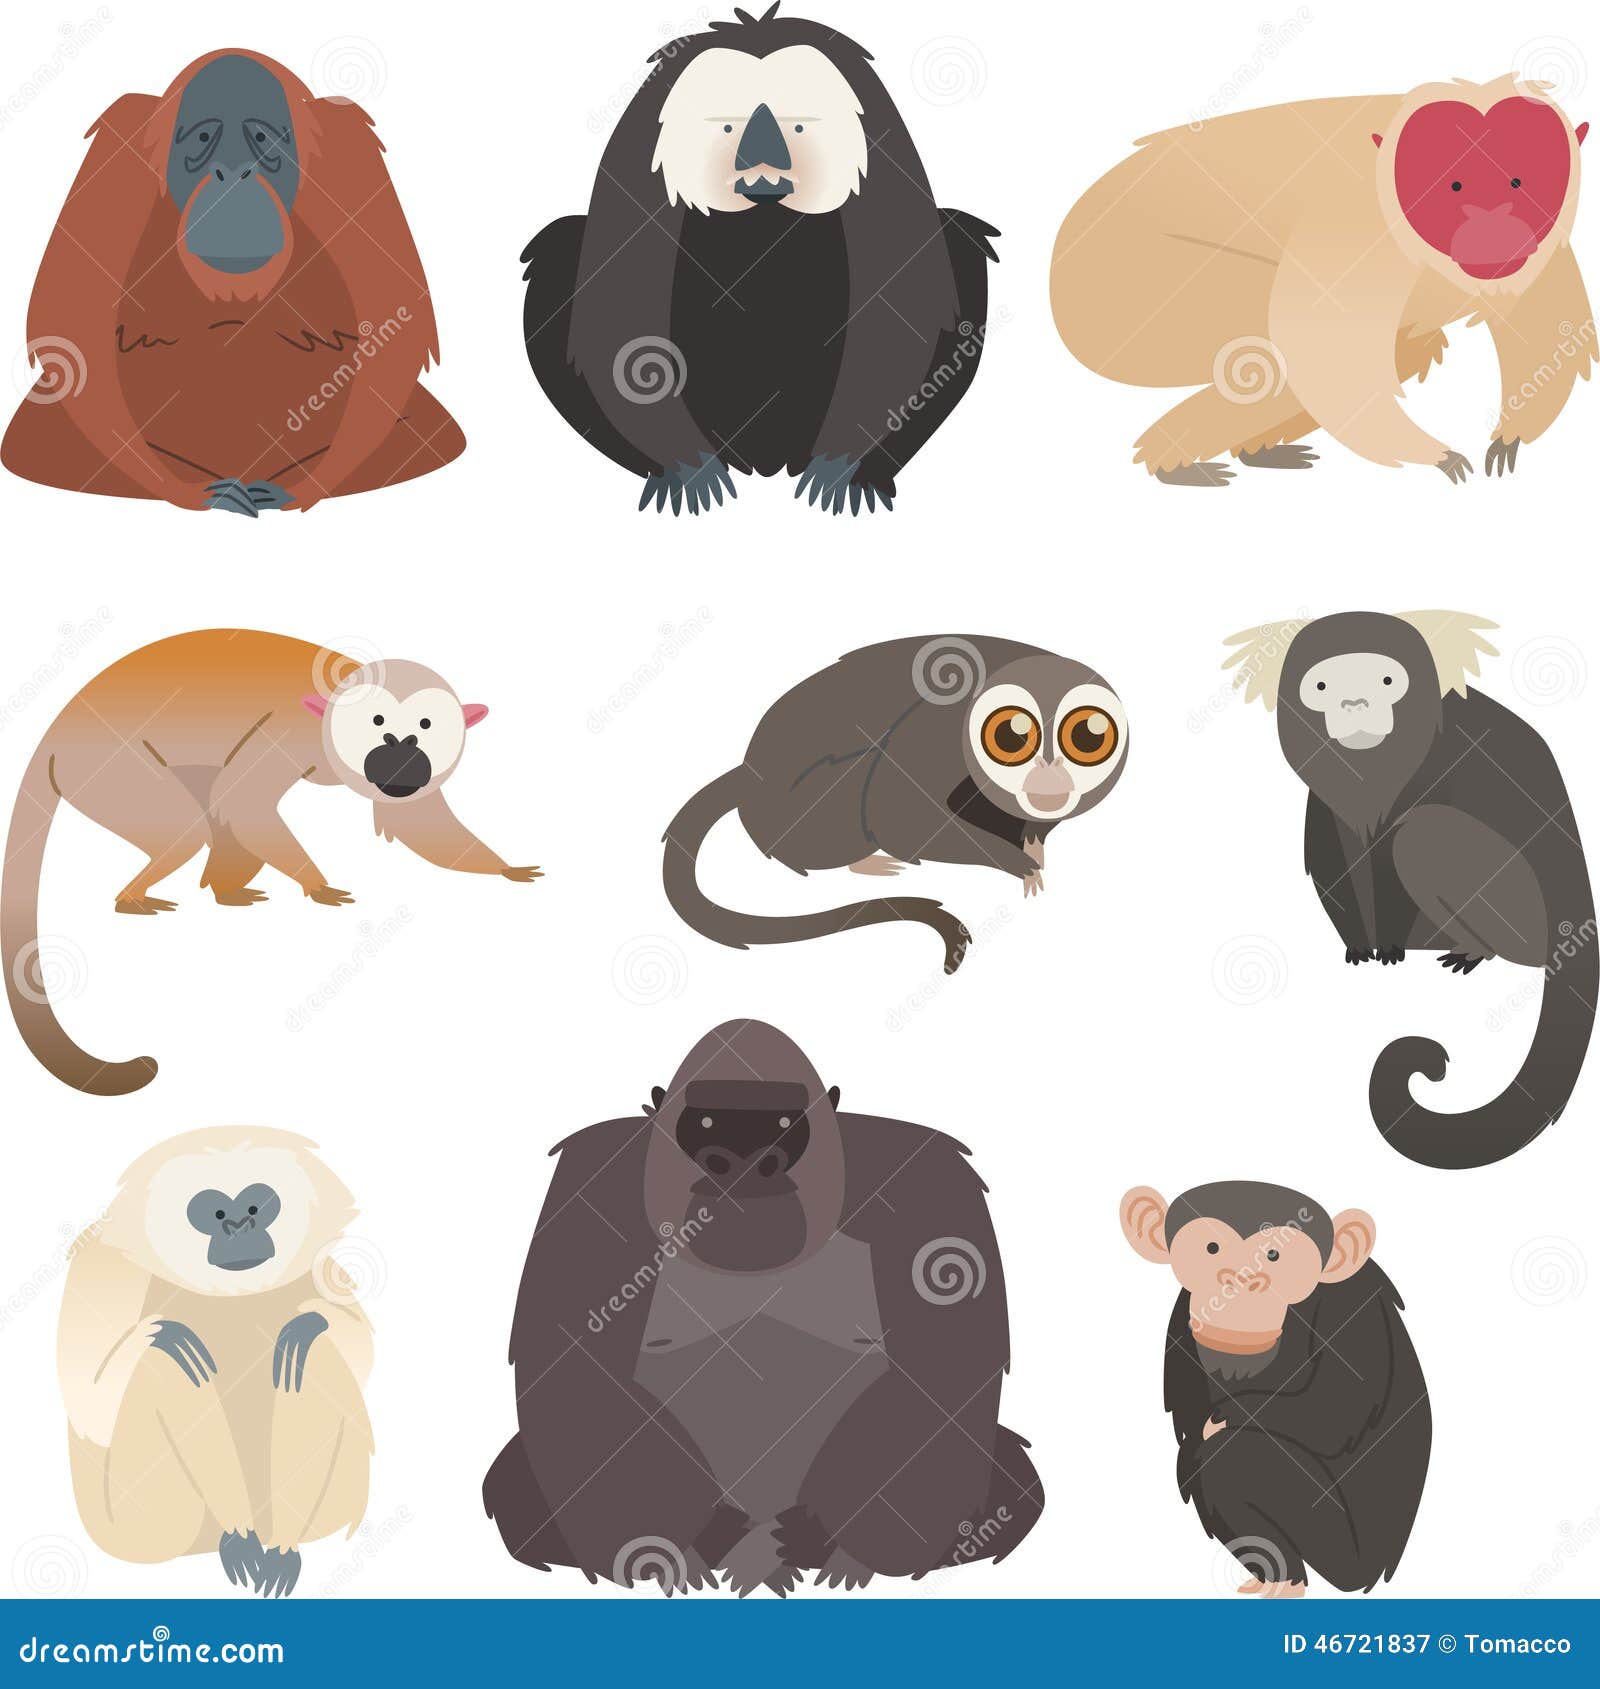 monkey and primate collection